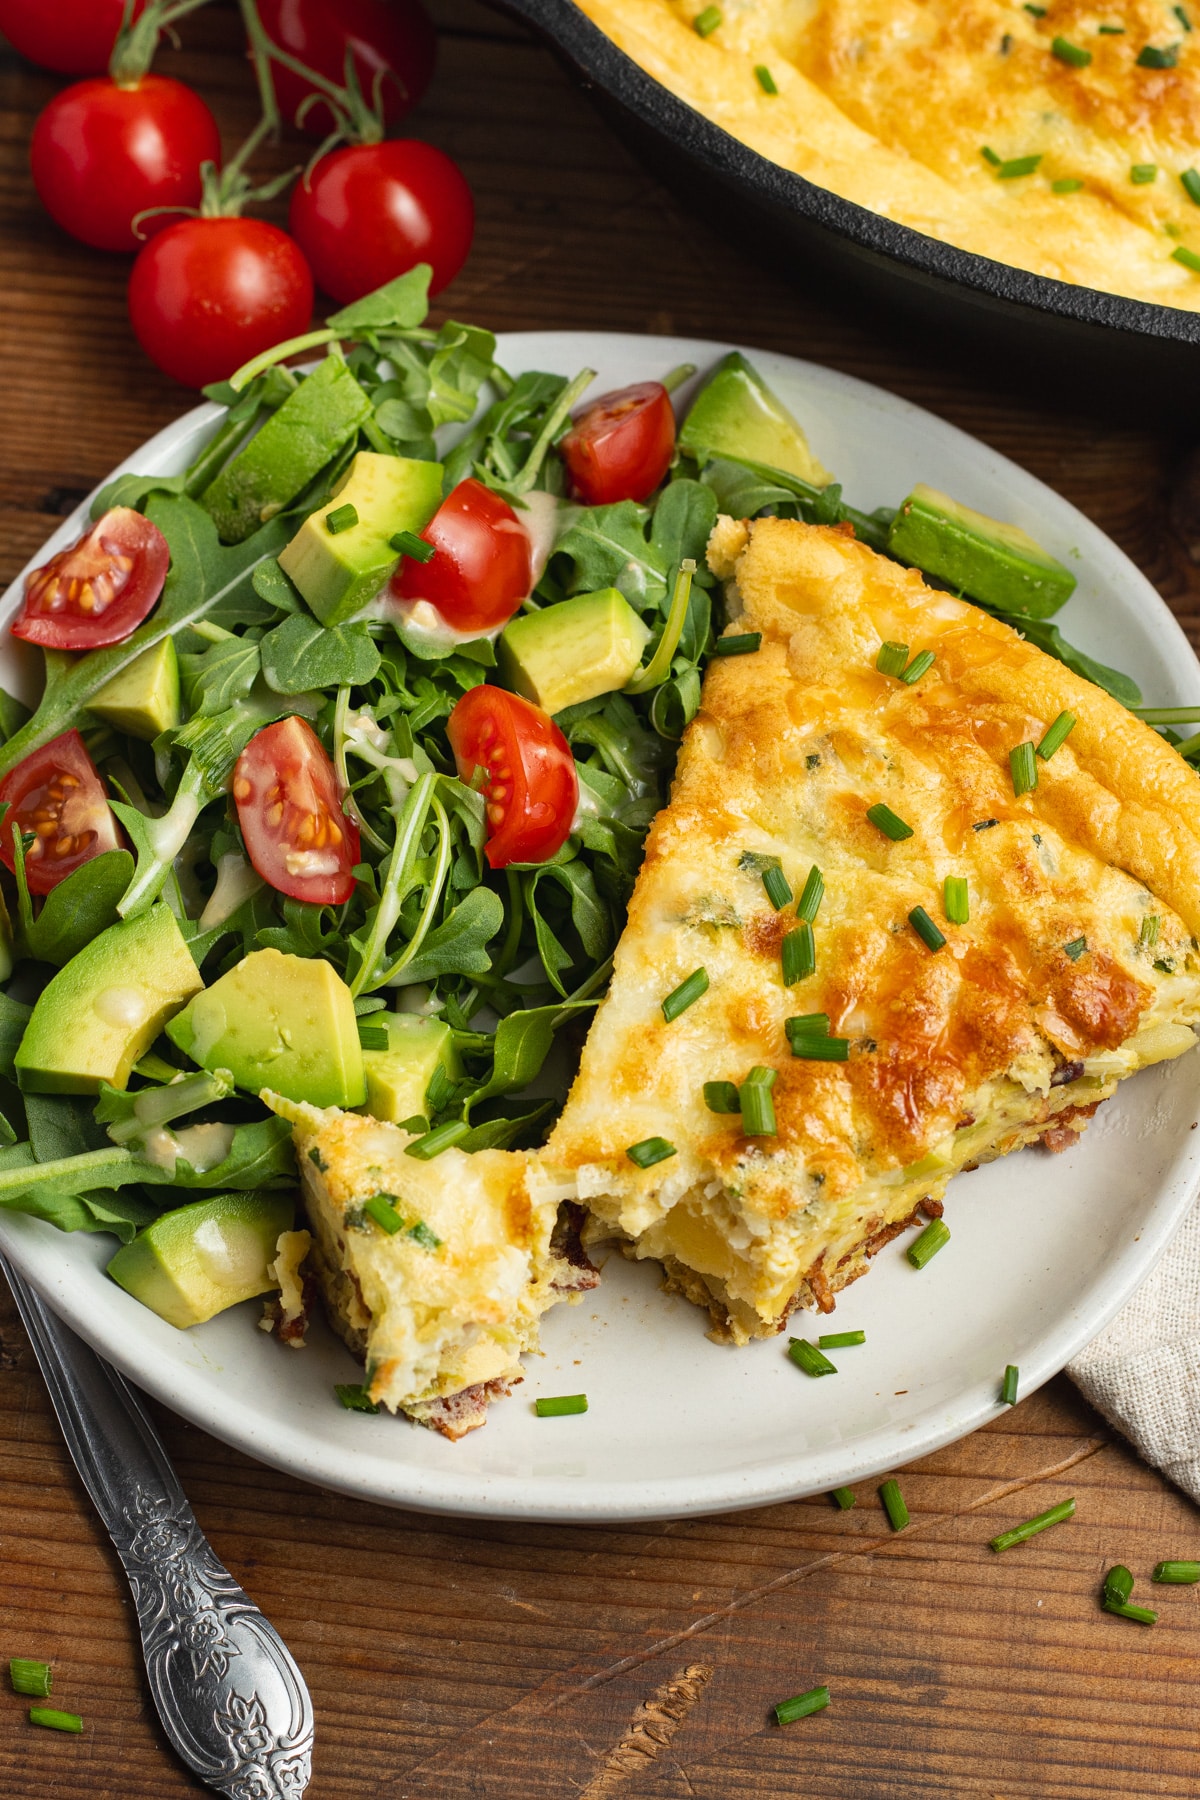 This is a picture of a plate with a slice of bacon leek frittata and a side salad.